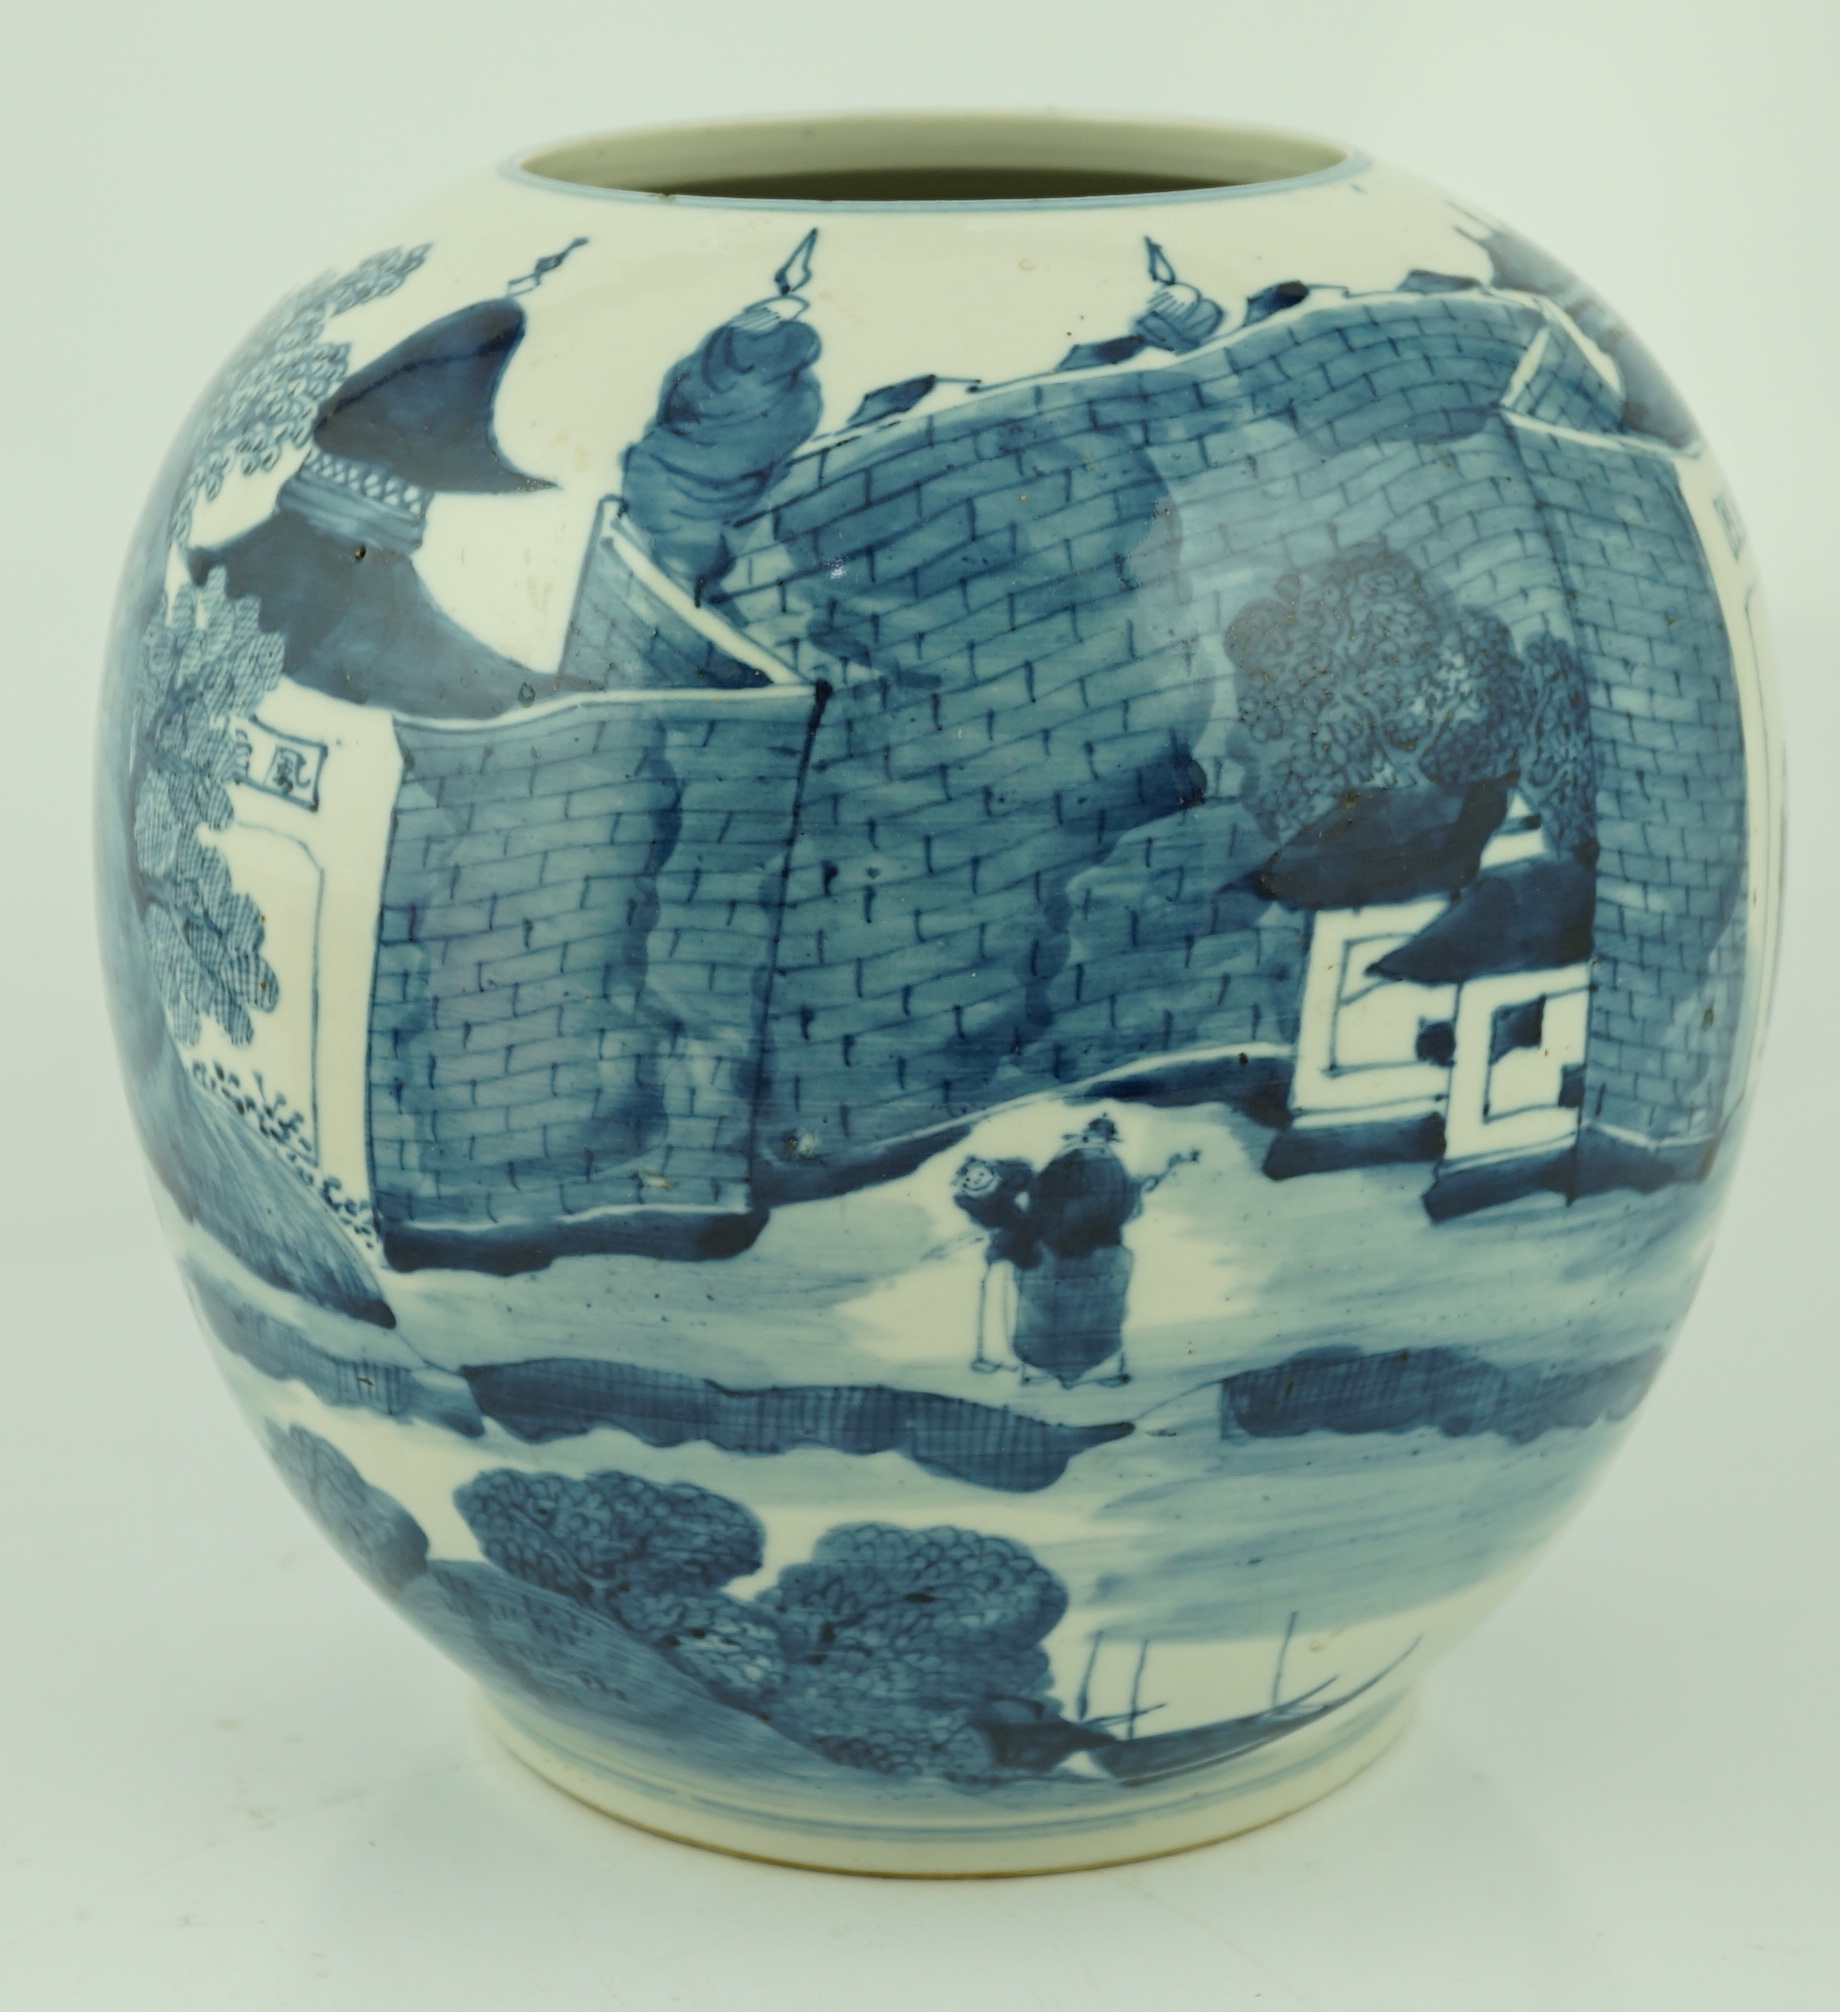 An unusual Chinese blue and white globe-shaped vase, late 19th century